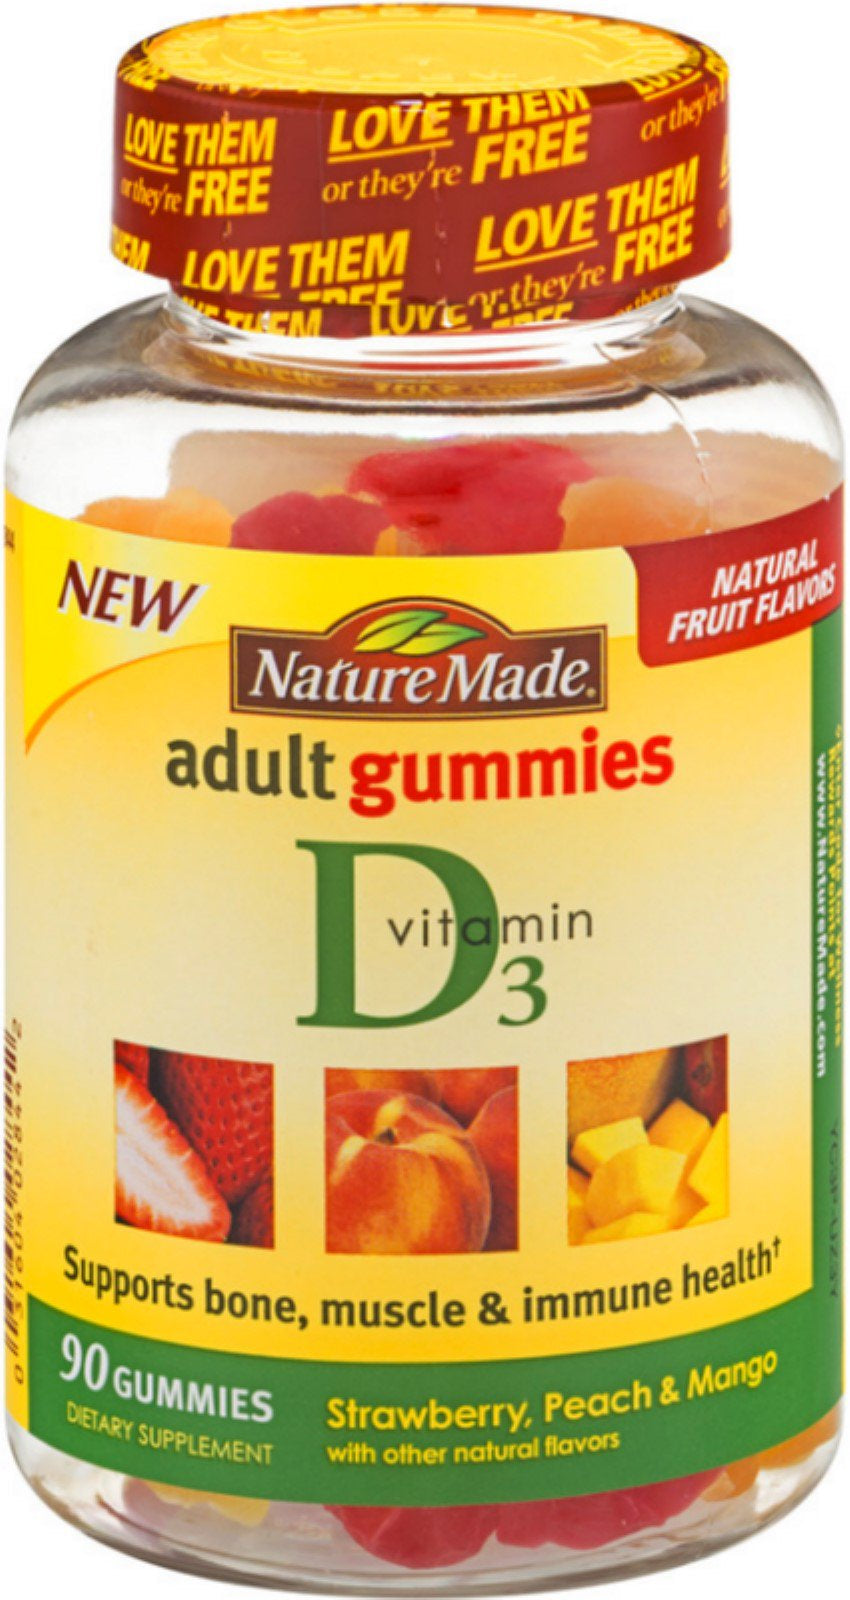 Nature Made Vitamin D3 Adult Gummies, Strawberry, Peach & Mango - (Pack of 2)